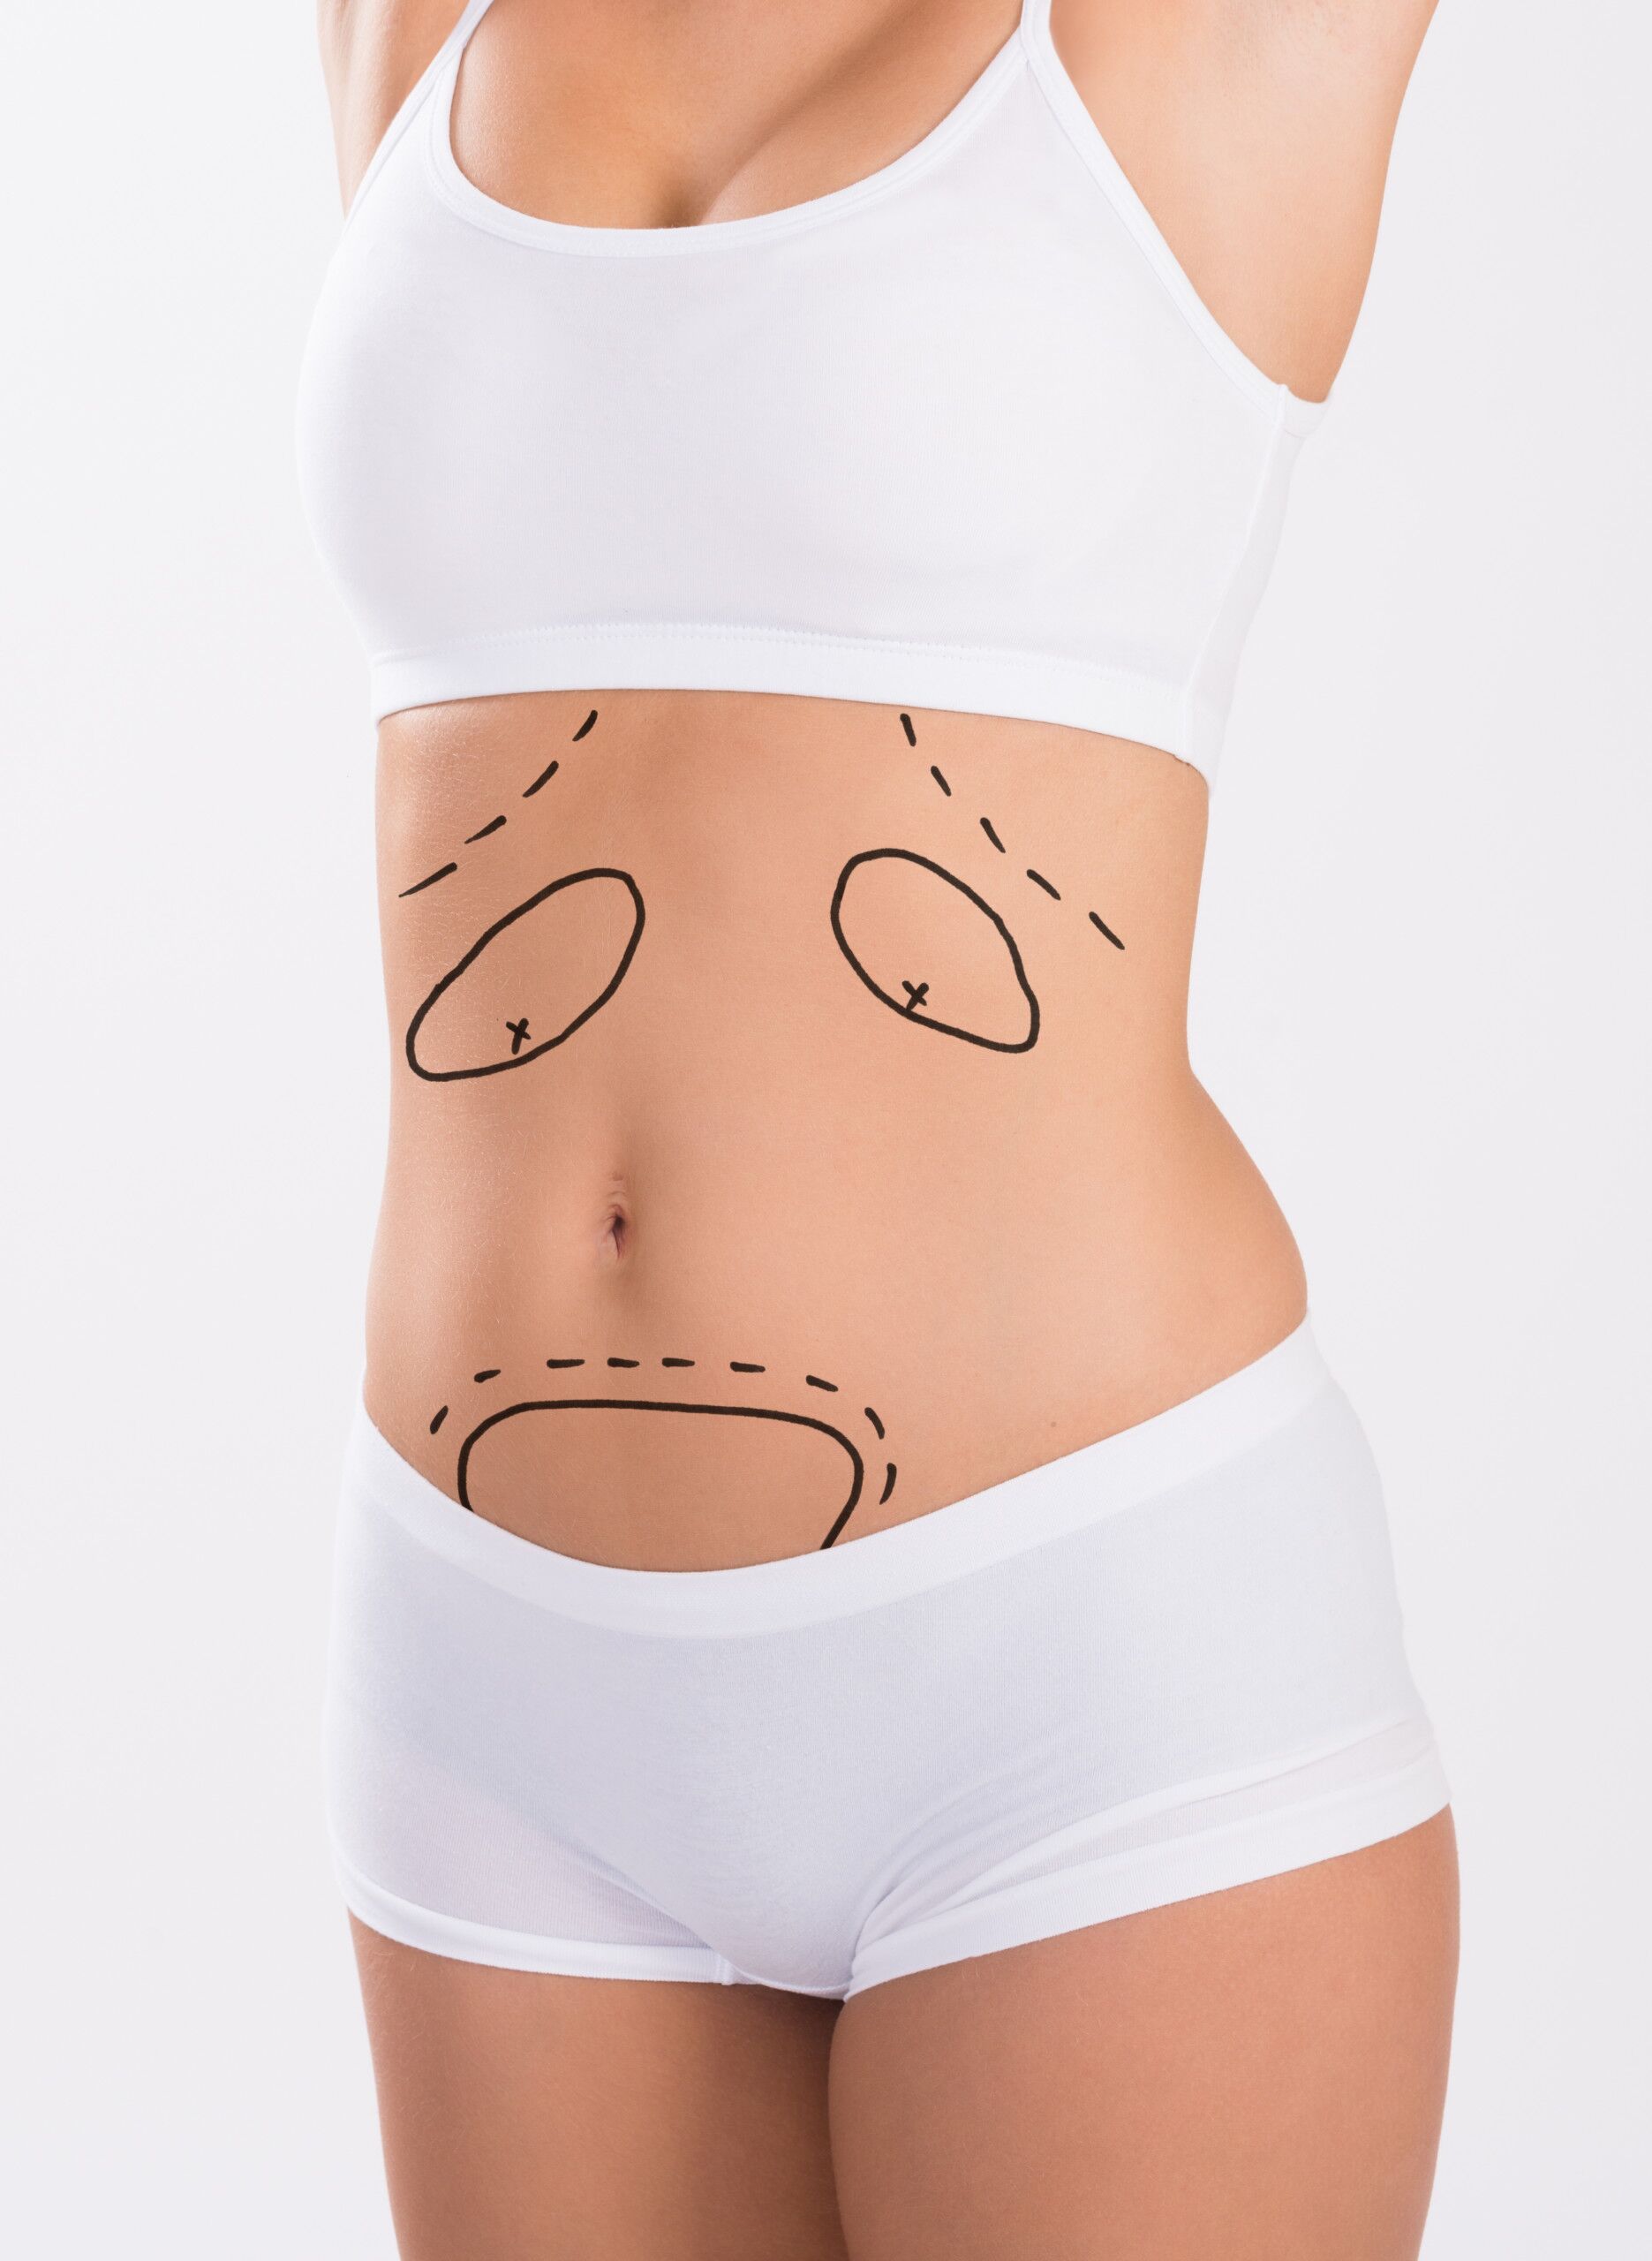 Cost of Tummy Tuck Explained